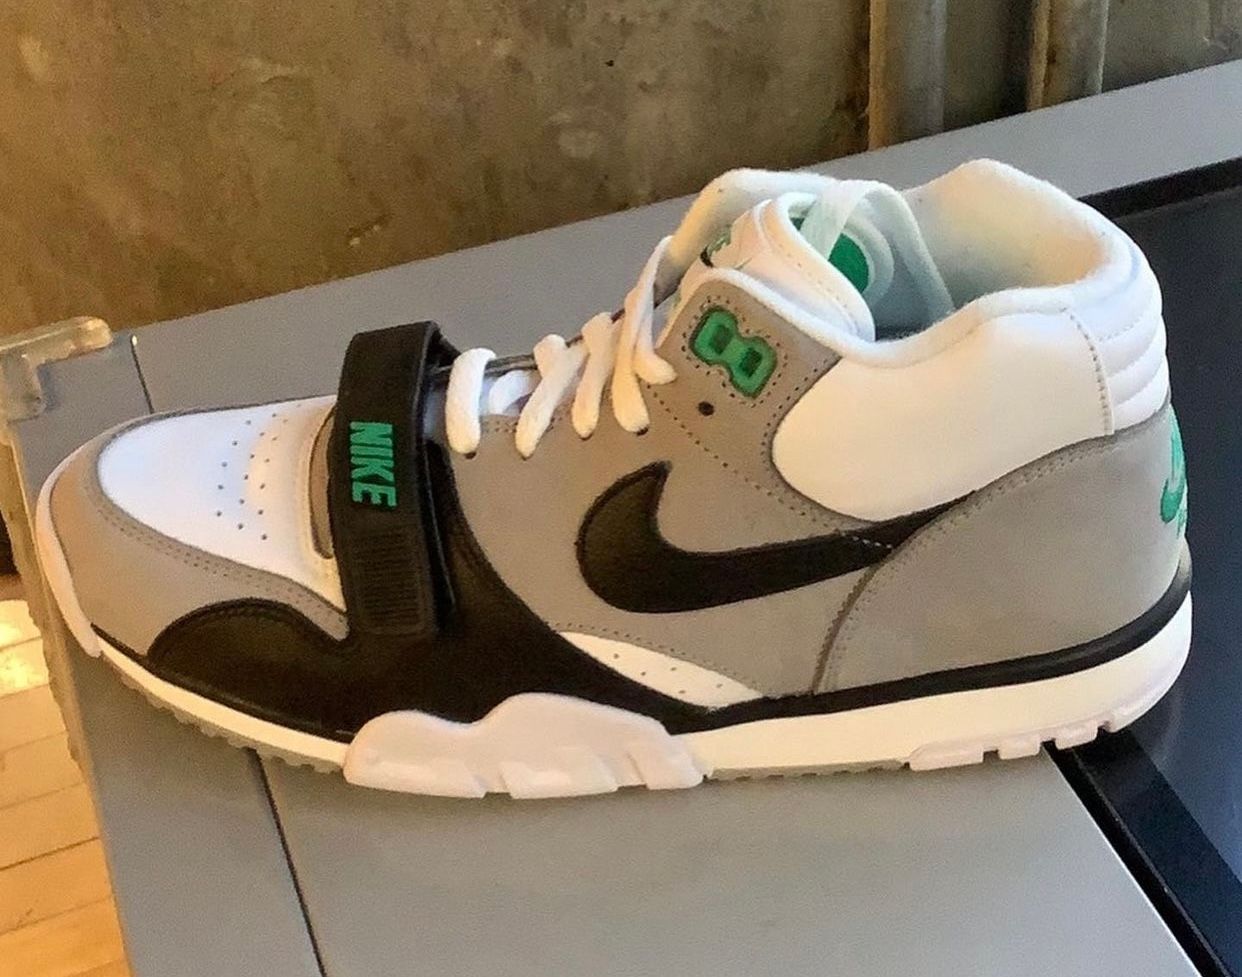 The Air Trainer 1 Mid 'Chlorophyll’ Returns for 30th Anniversary